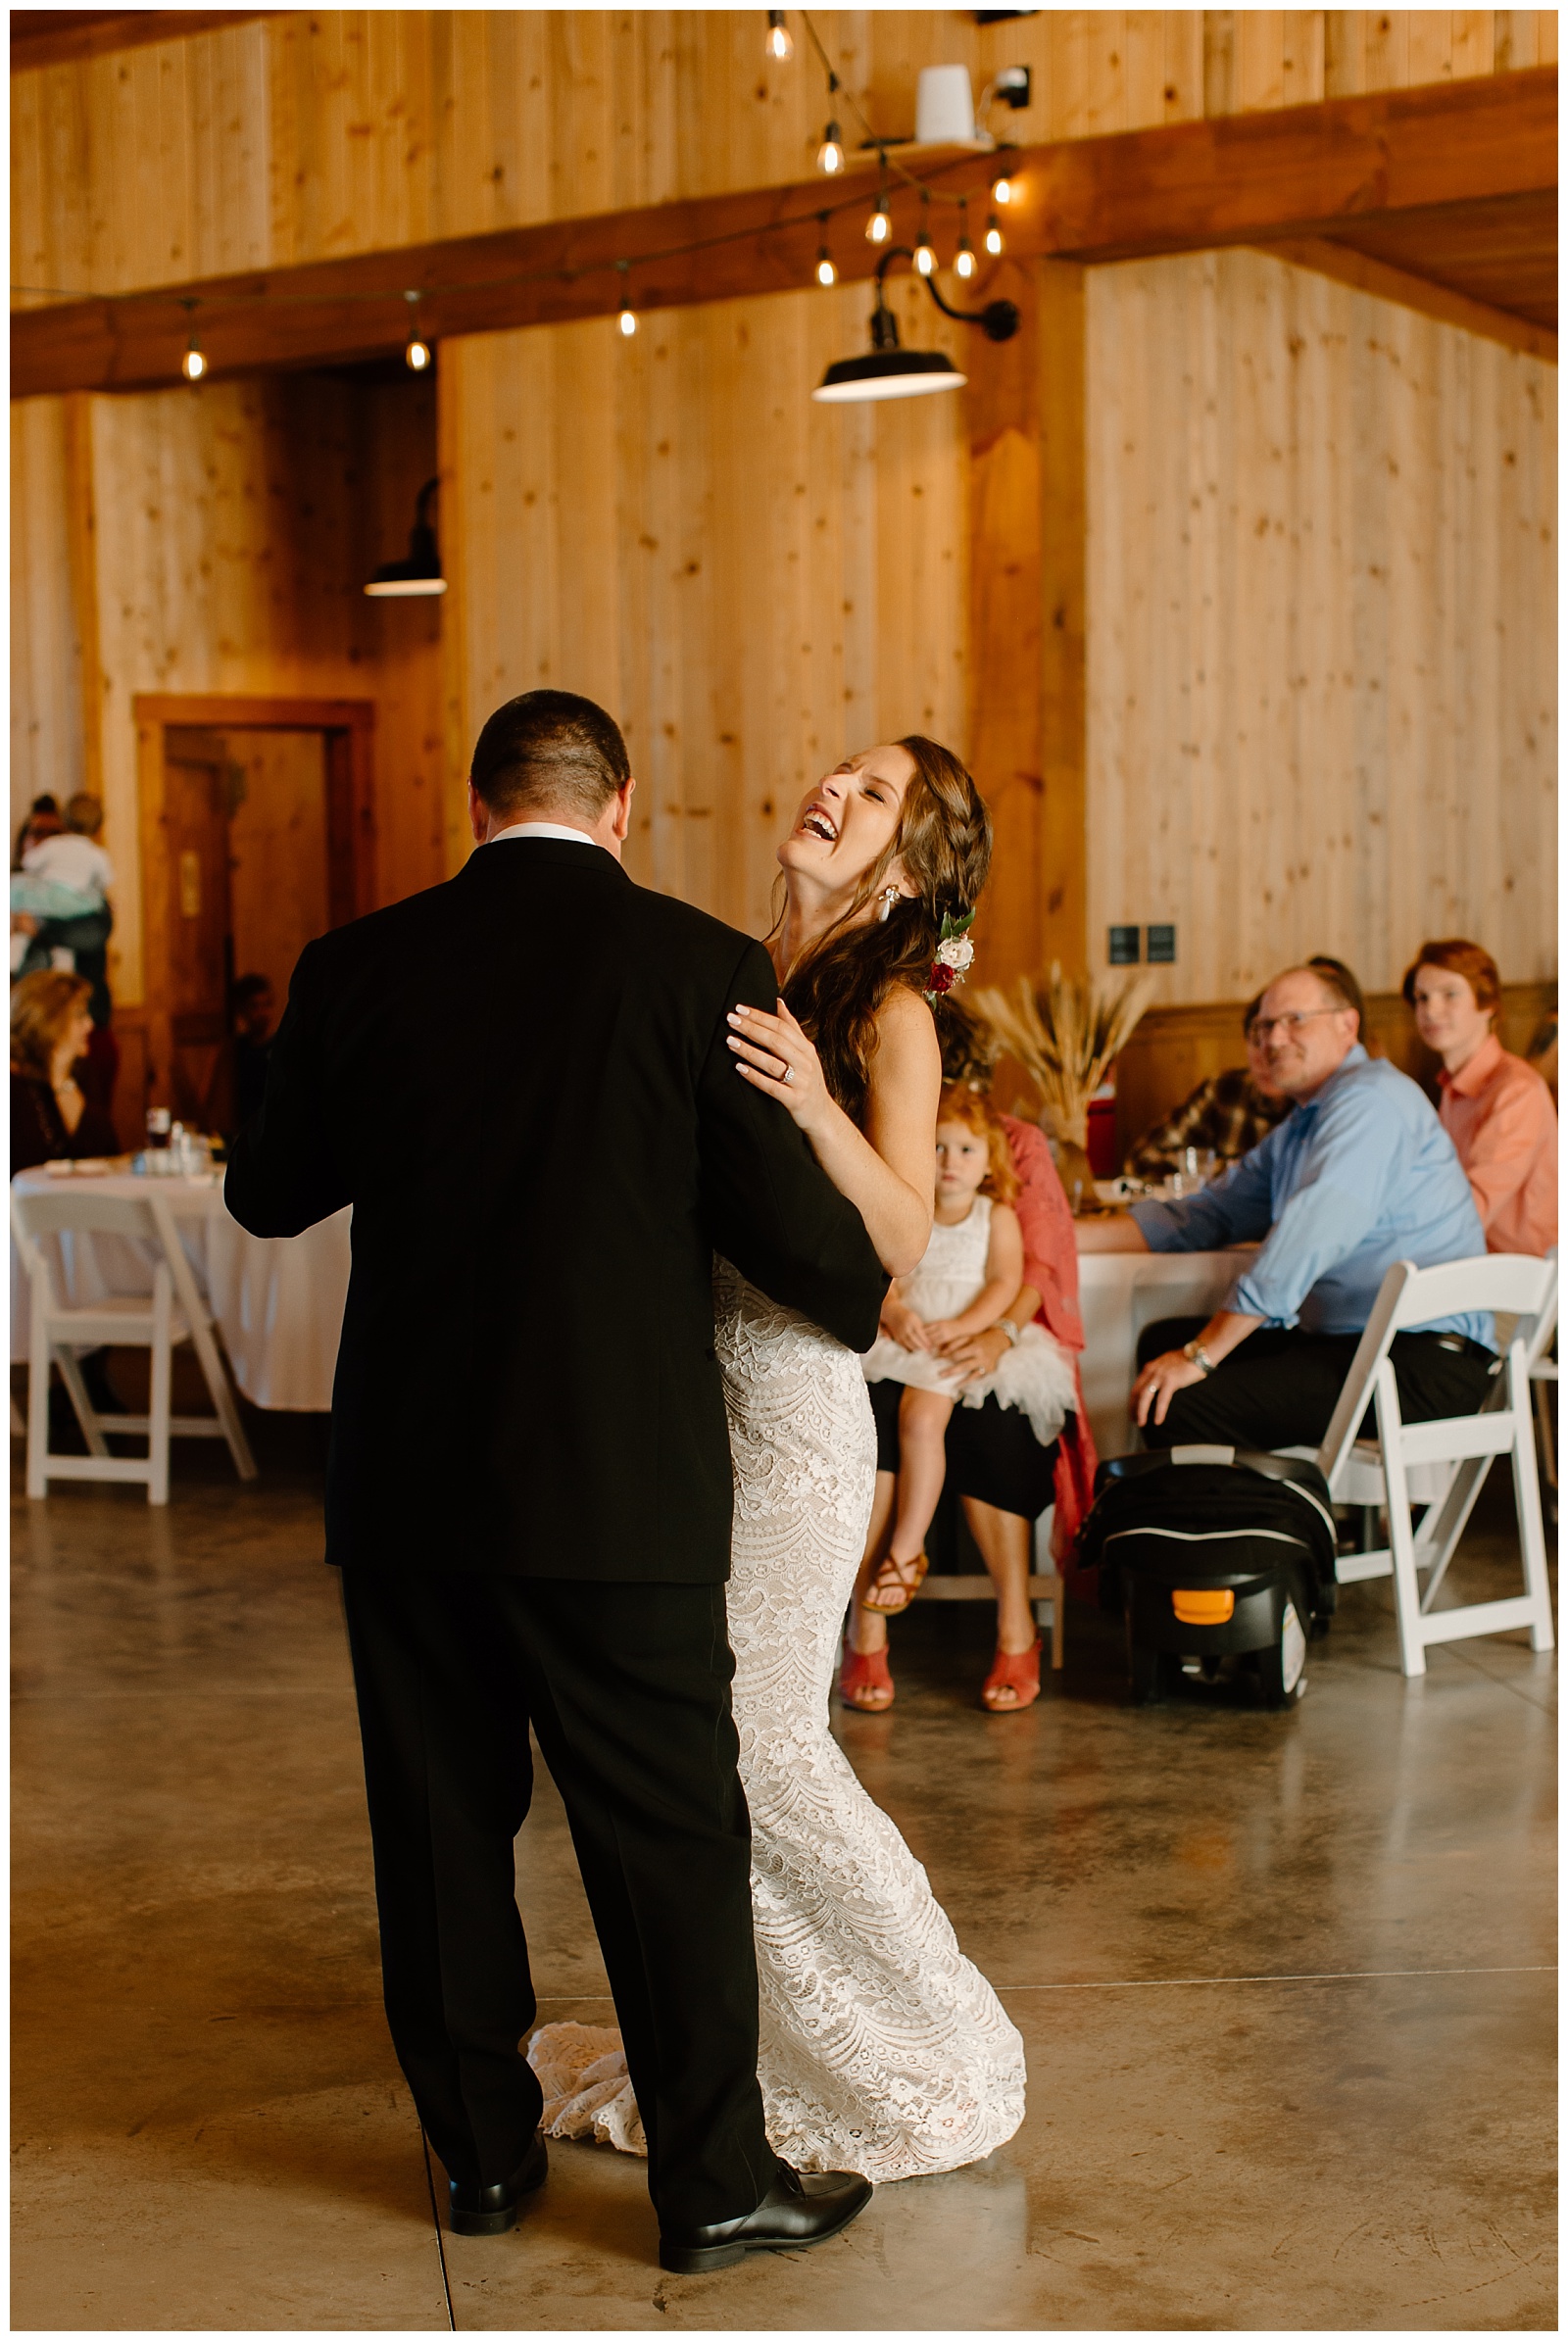 Bride's father makes her laugh during their special father daughter dance at their wedding reception